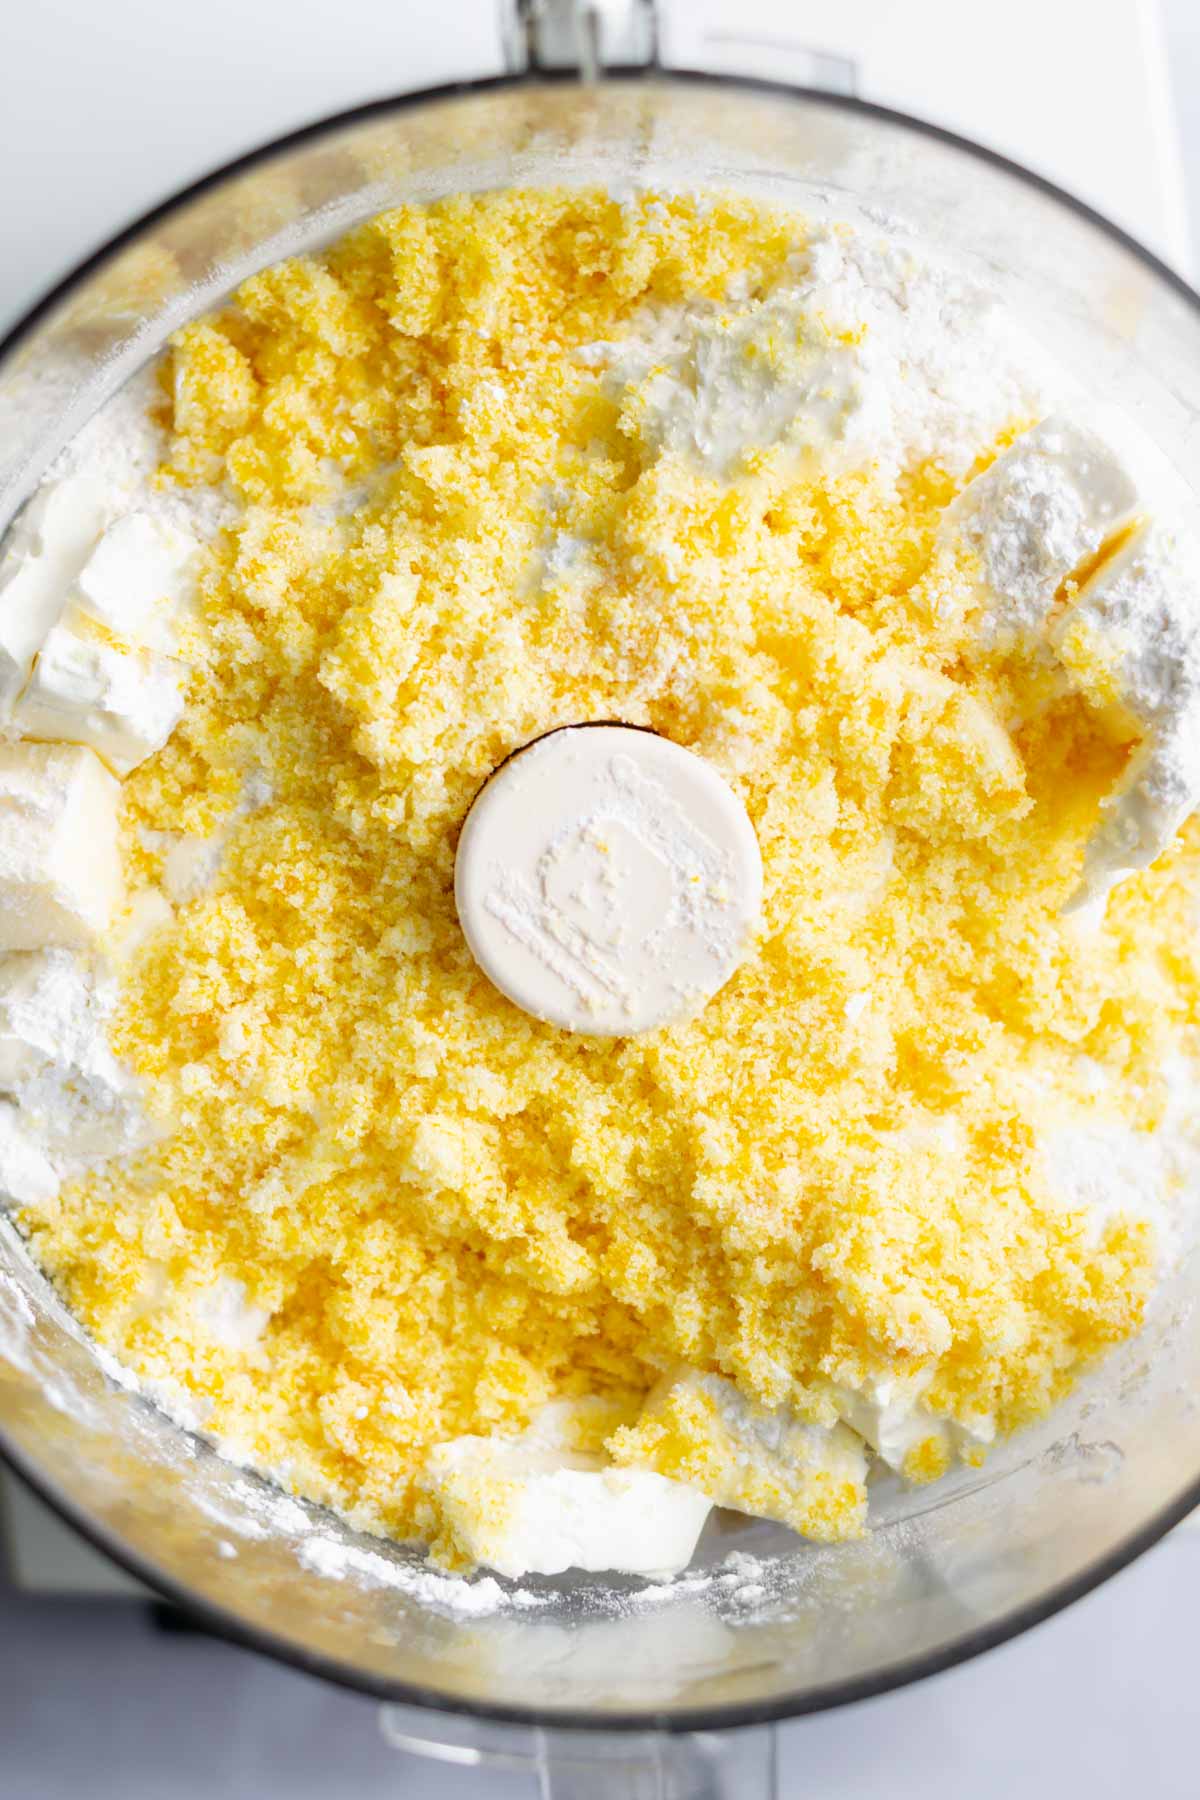 orange sugar, butter and cream cheese added to a food processor bowl